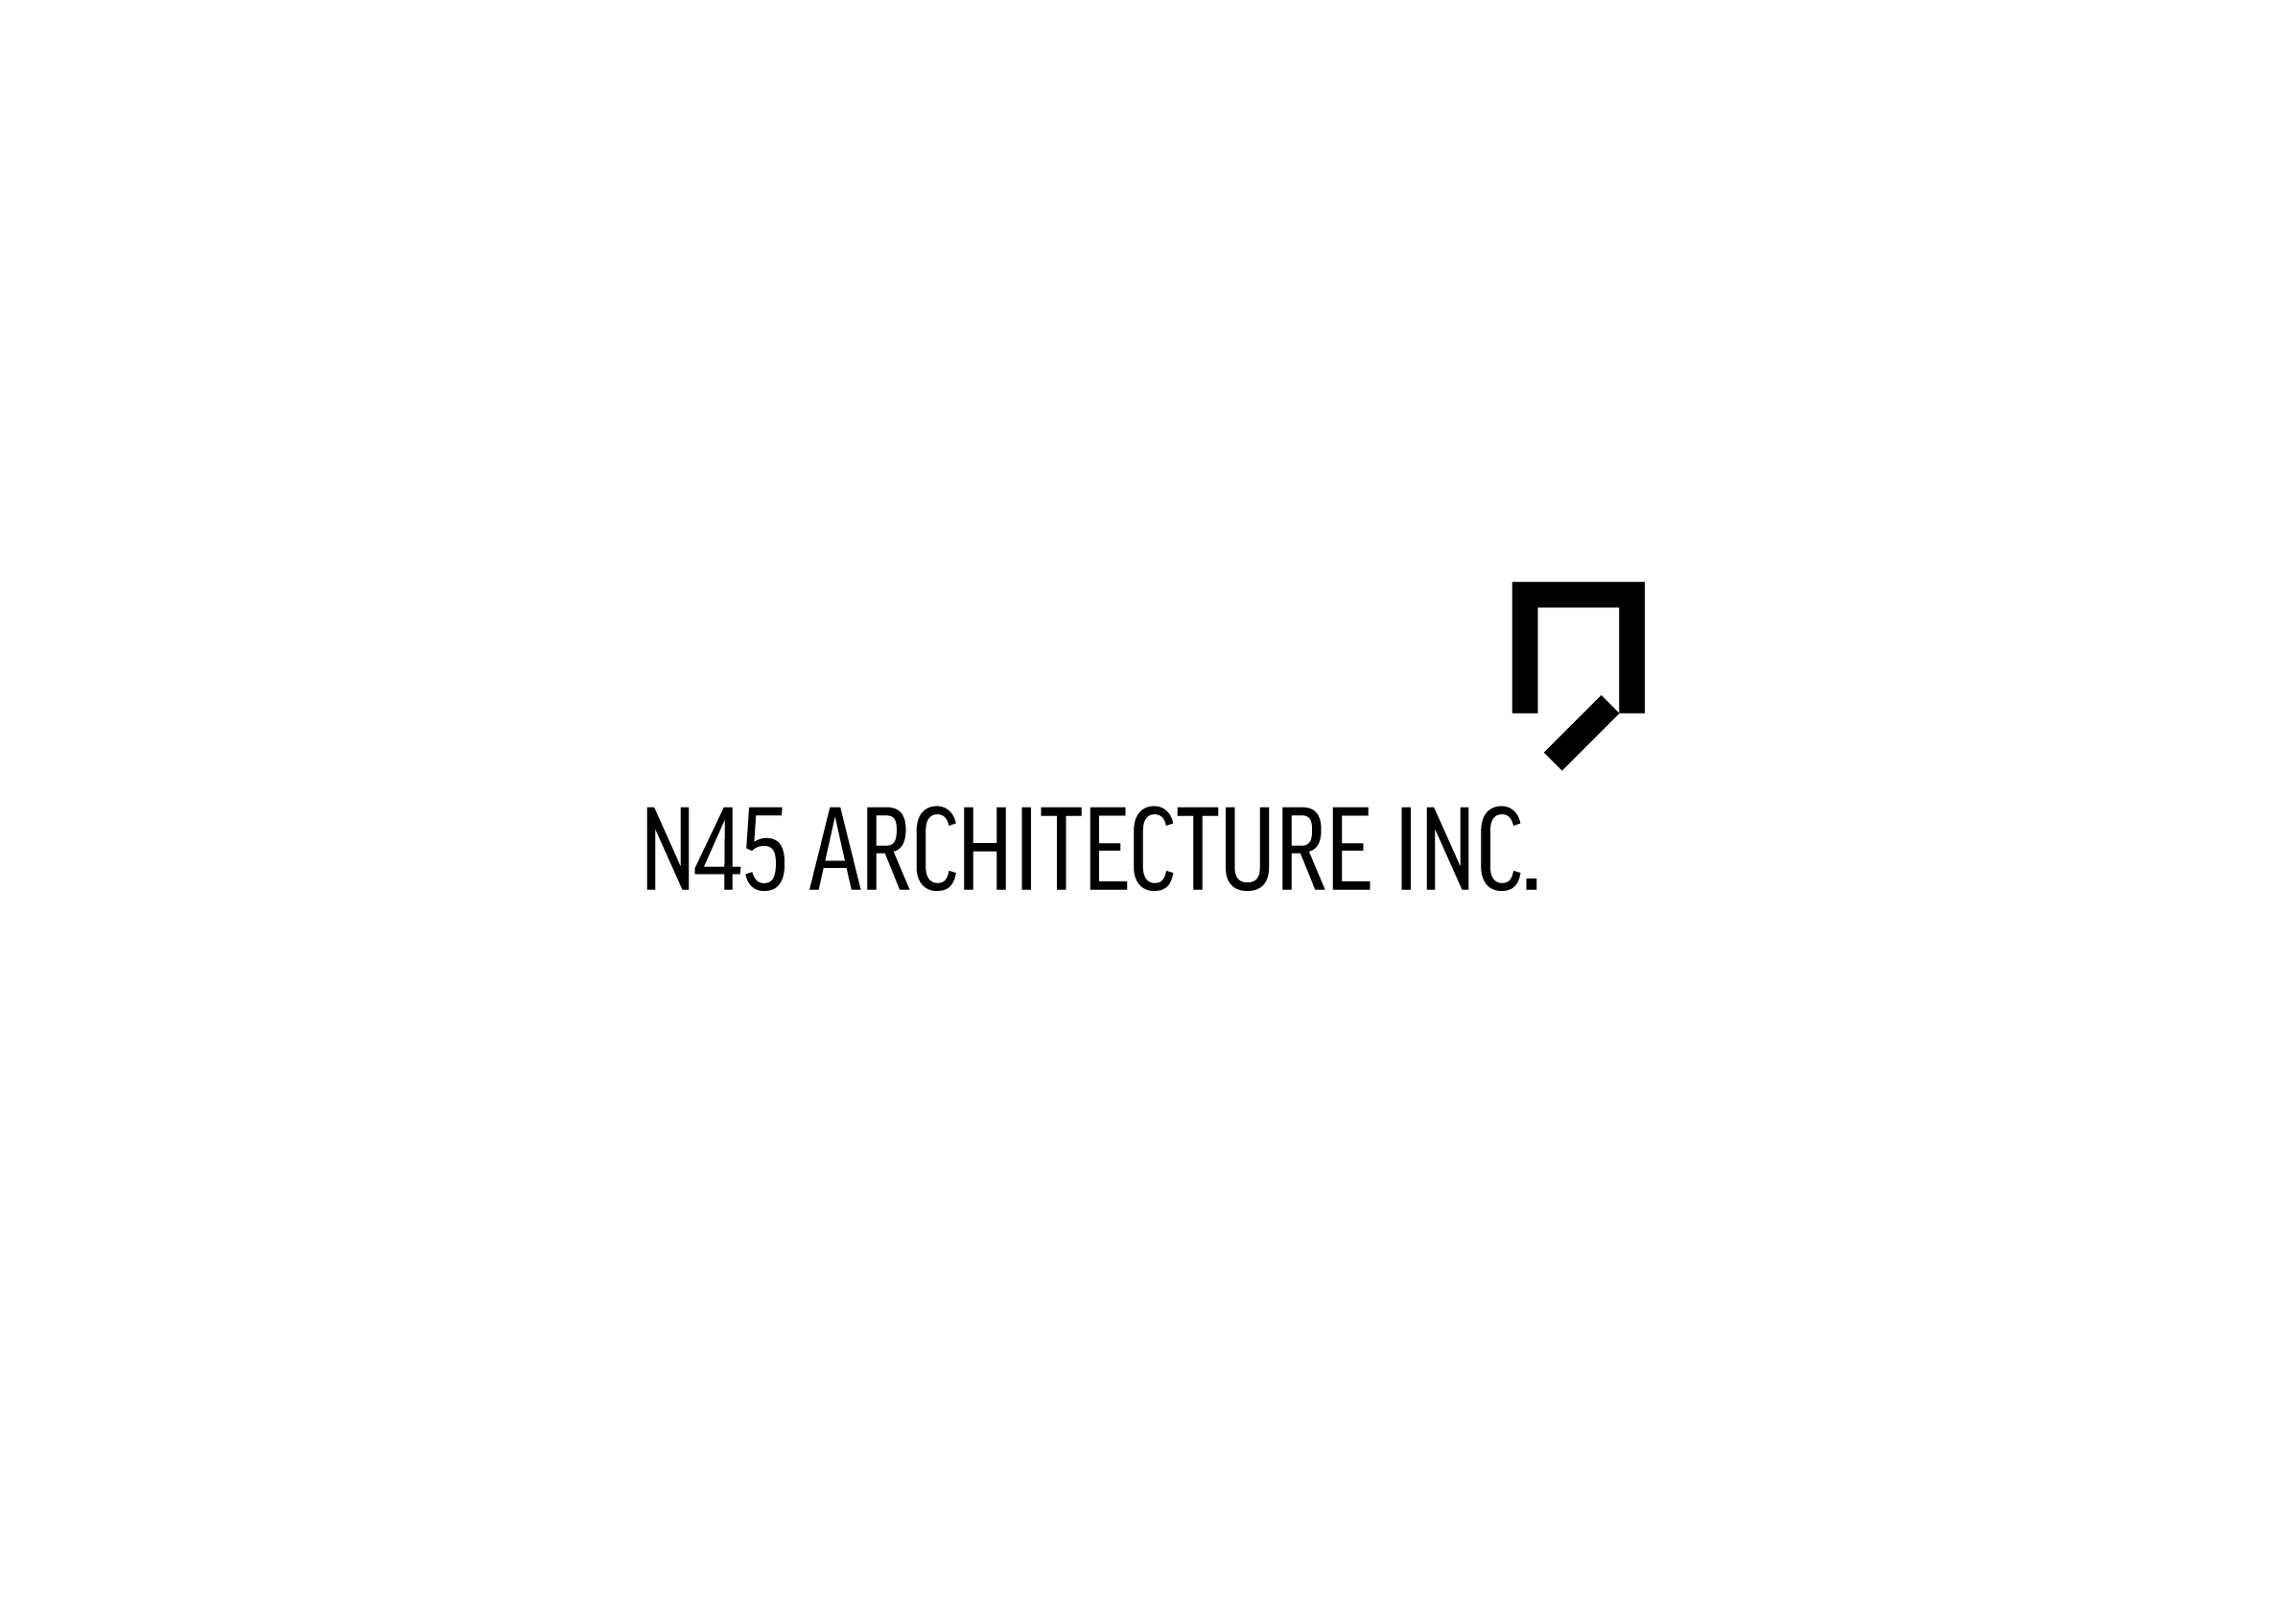 Logo Black for N45 Architecture Inc., architects by Graphic Designer idApostle